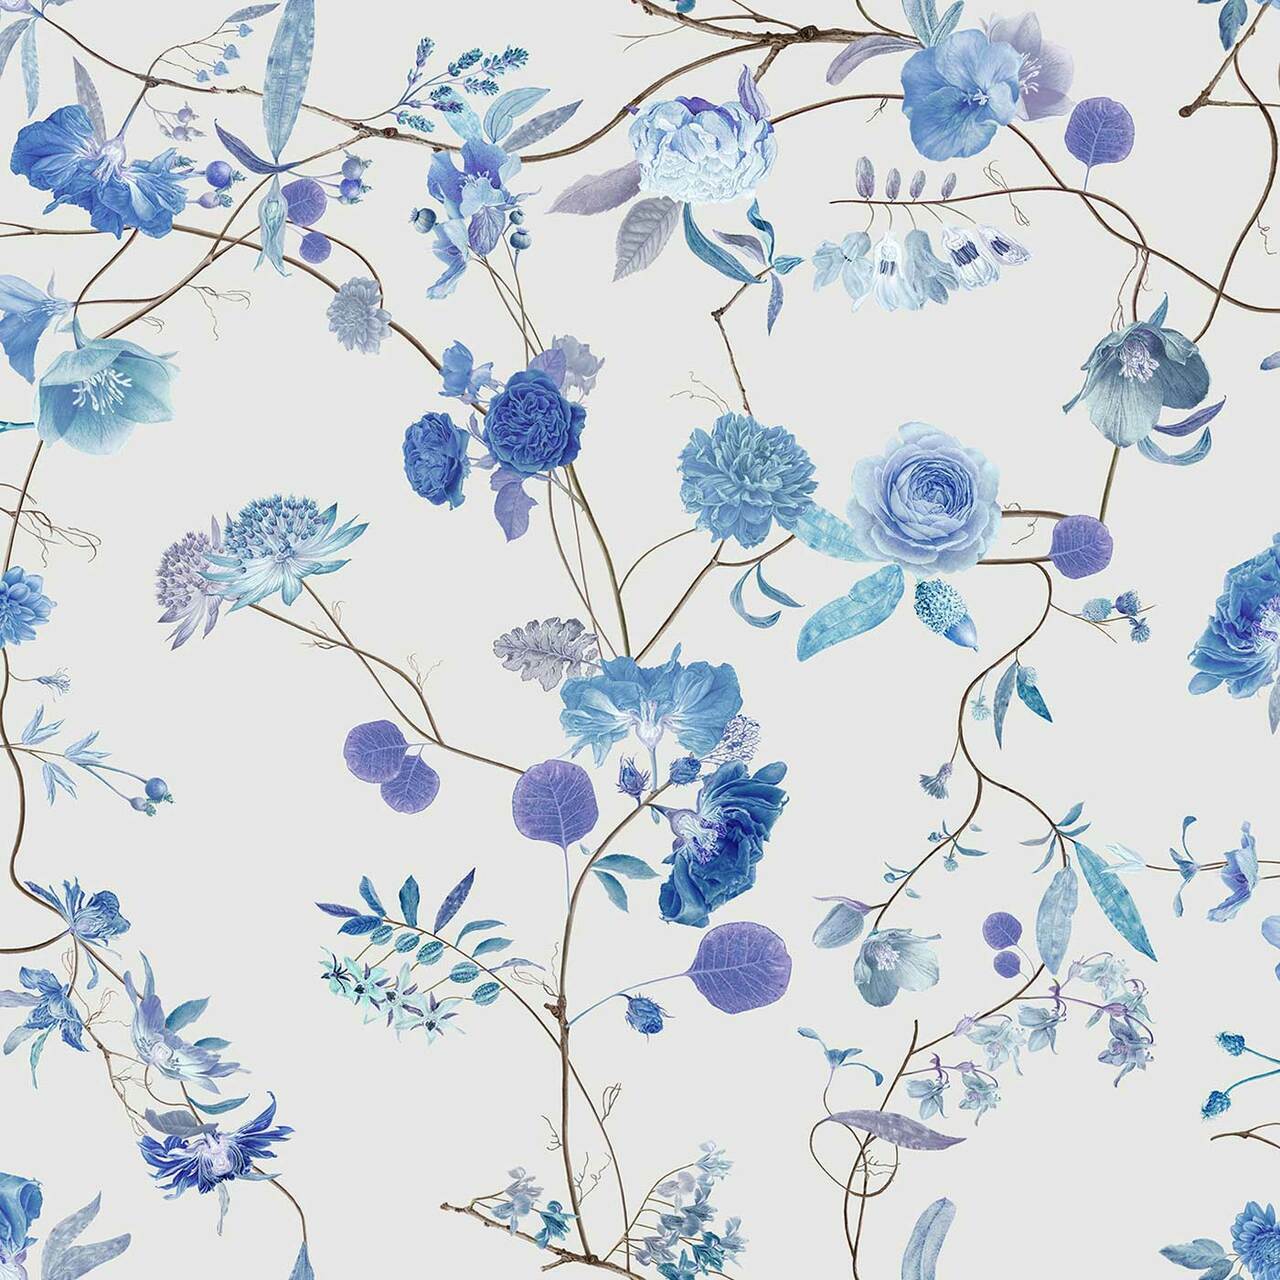 NISH Blue Chinoiserie Wallpaper Mural  bg 001 Vinyl Wall Covering  96sqft  12ft x 8ft  Made in 3pc Dark Blue Color HD Quality Waterproof  Oilproof  Amazonin Home Improvement